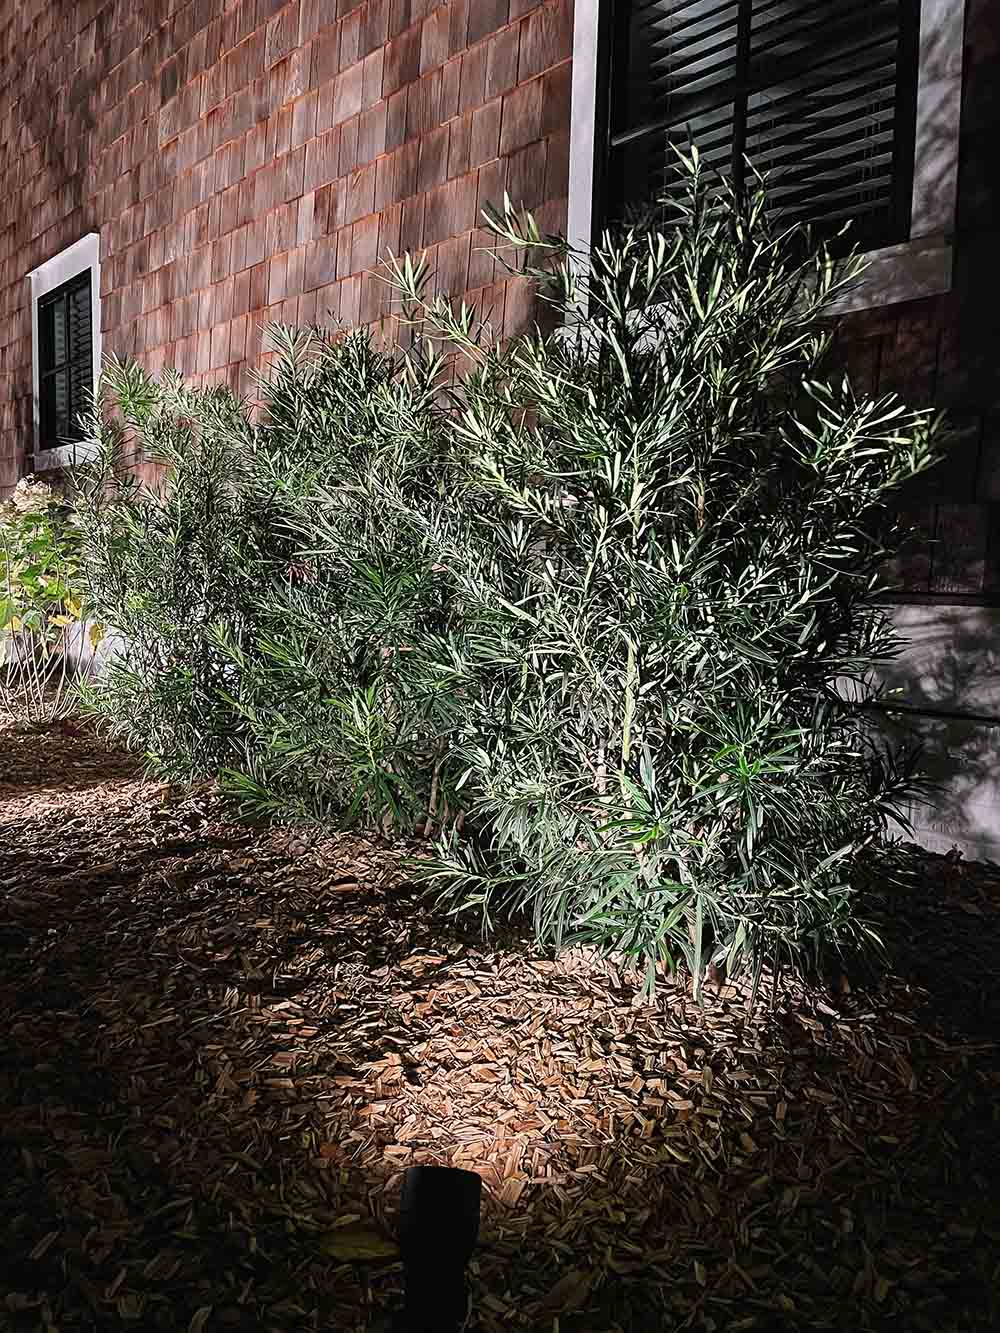 A closeup shot of bushes at night being lit by small outdoor lights.